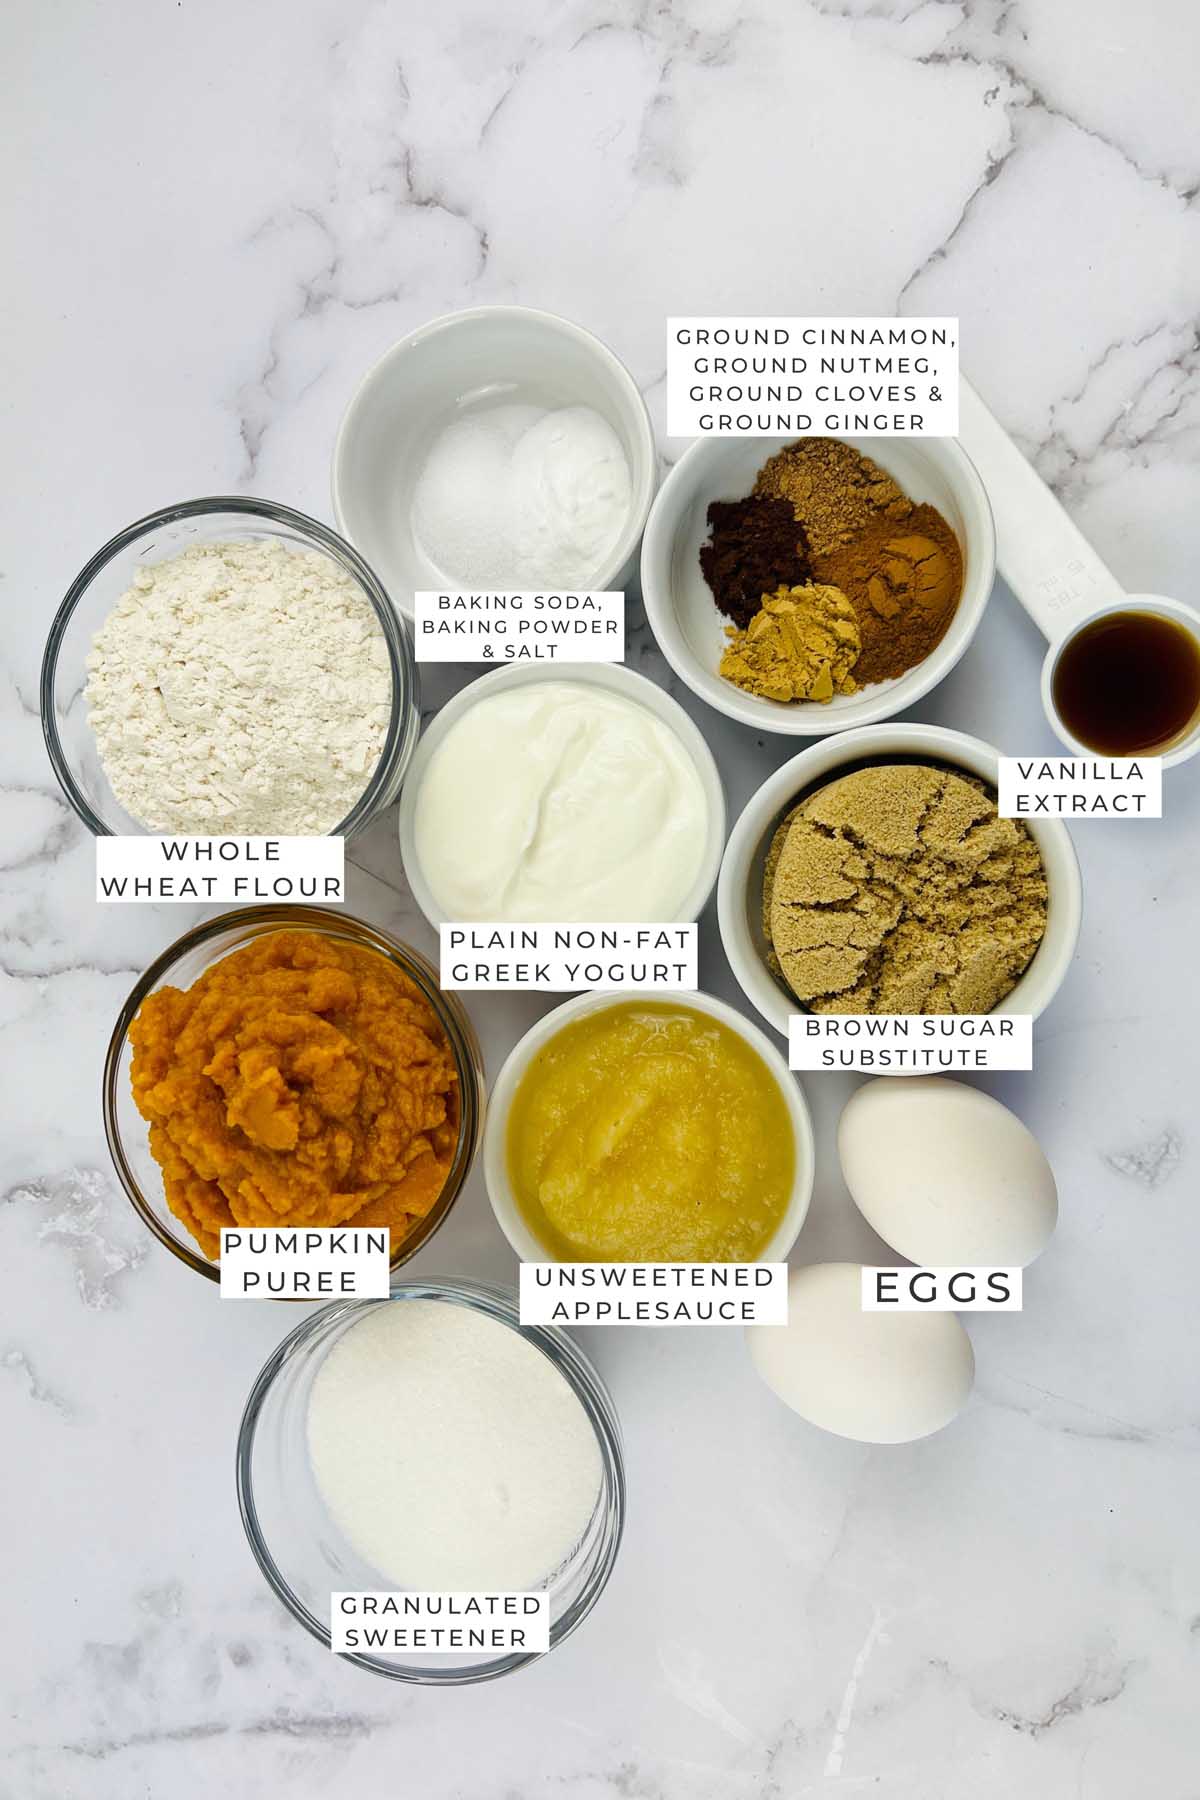 Labeled ingredients to make the pumpkin bread.